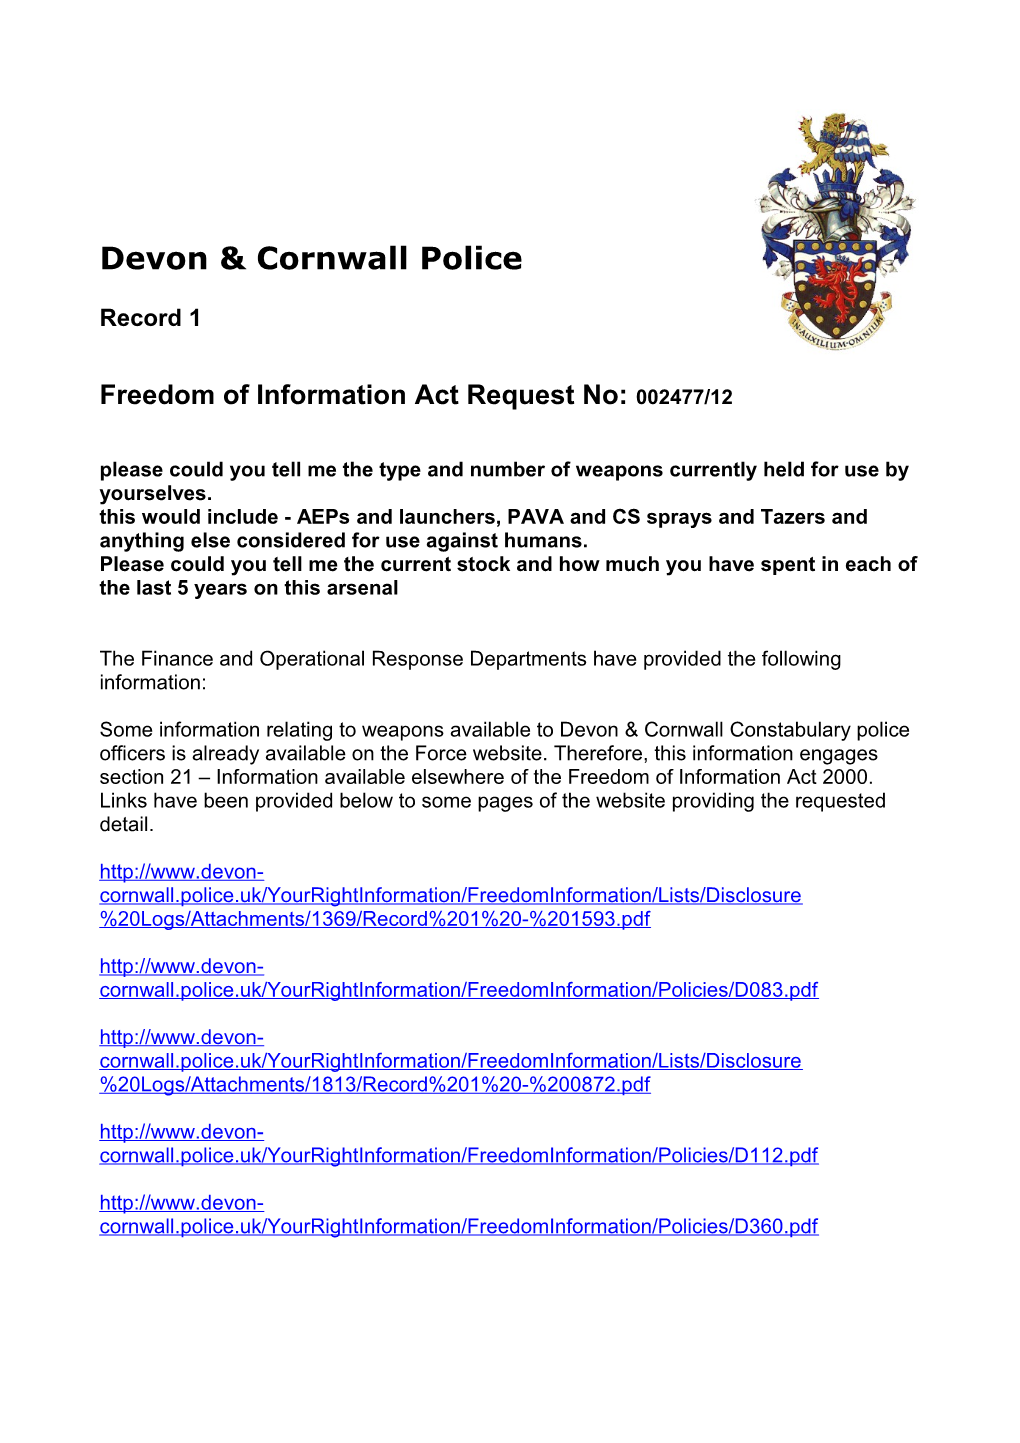 Freedom of Information Act Request No:002477/12